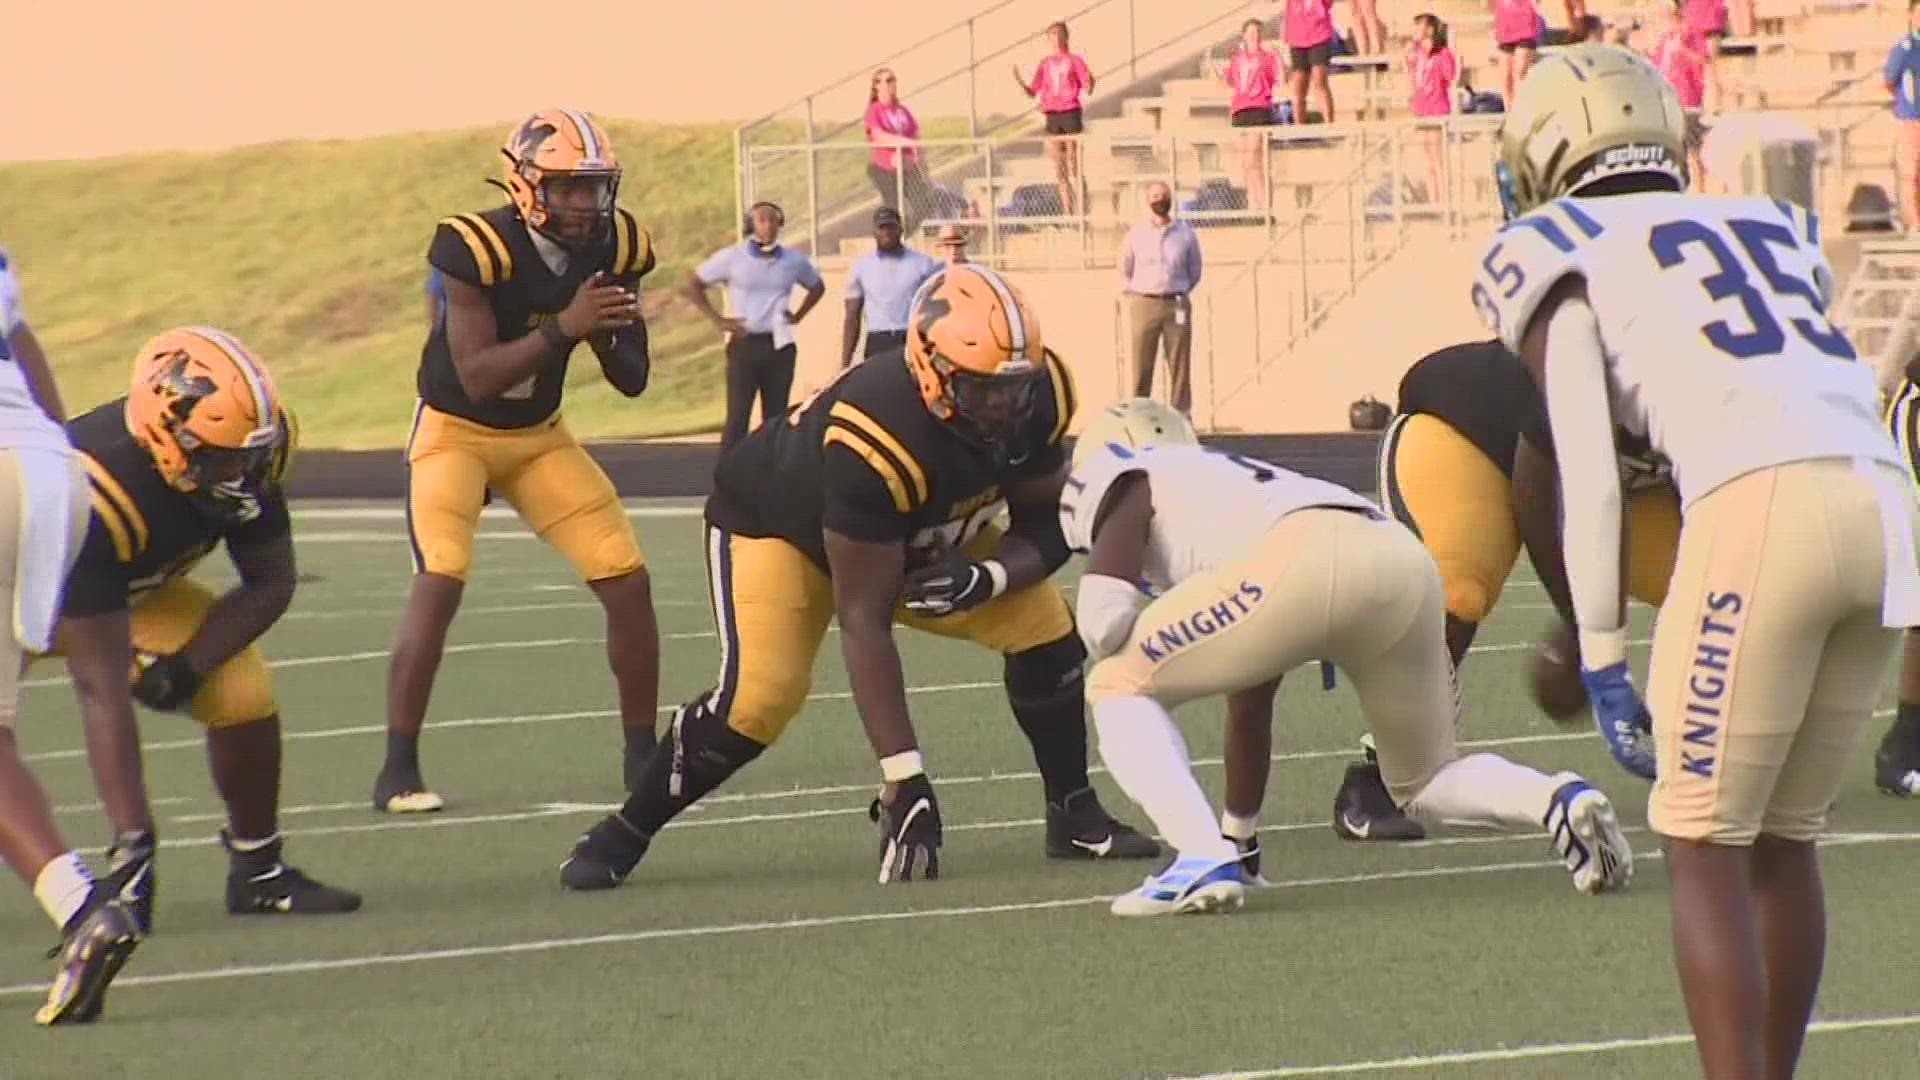 This is the first segment of 'The Program' featuring the Marshall Buffalos of Fort Bend ISD.